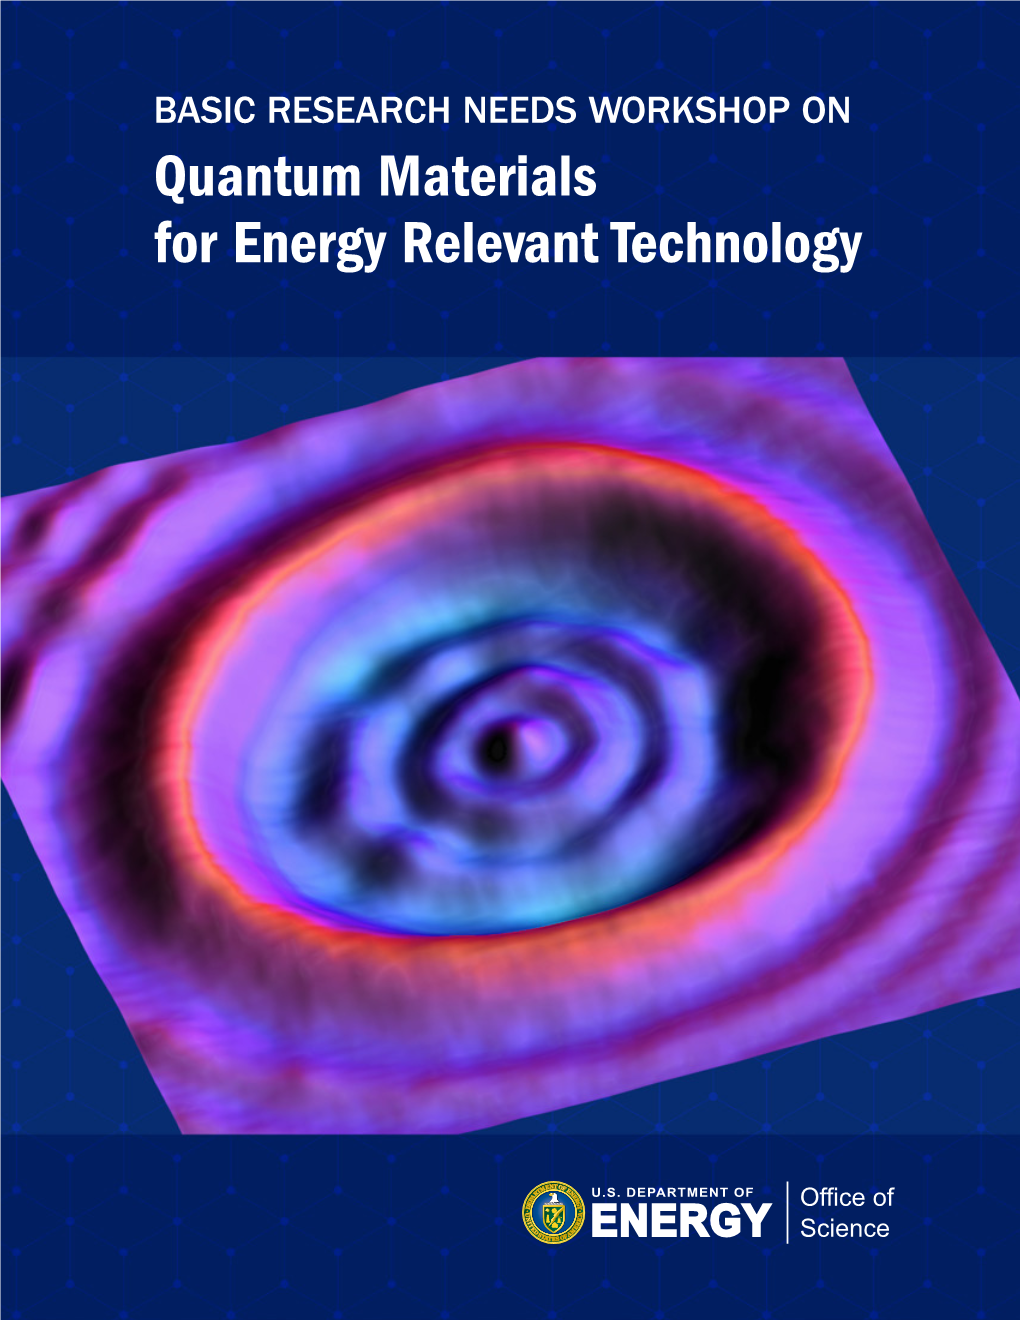 Basic Research Needs Workshop on Quantum Materials for Energy Relevant Technology